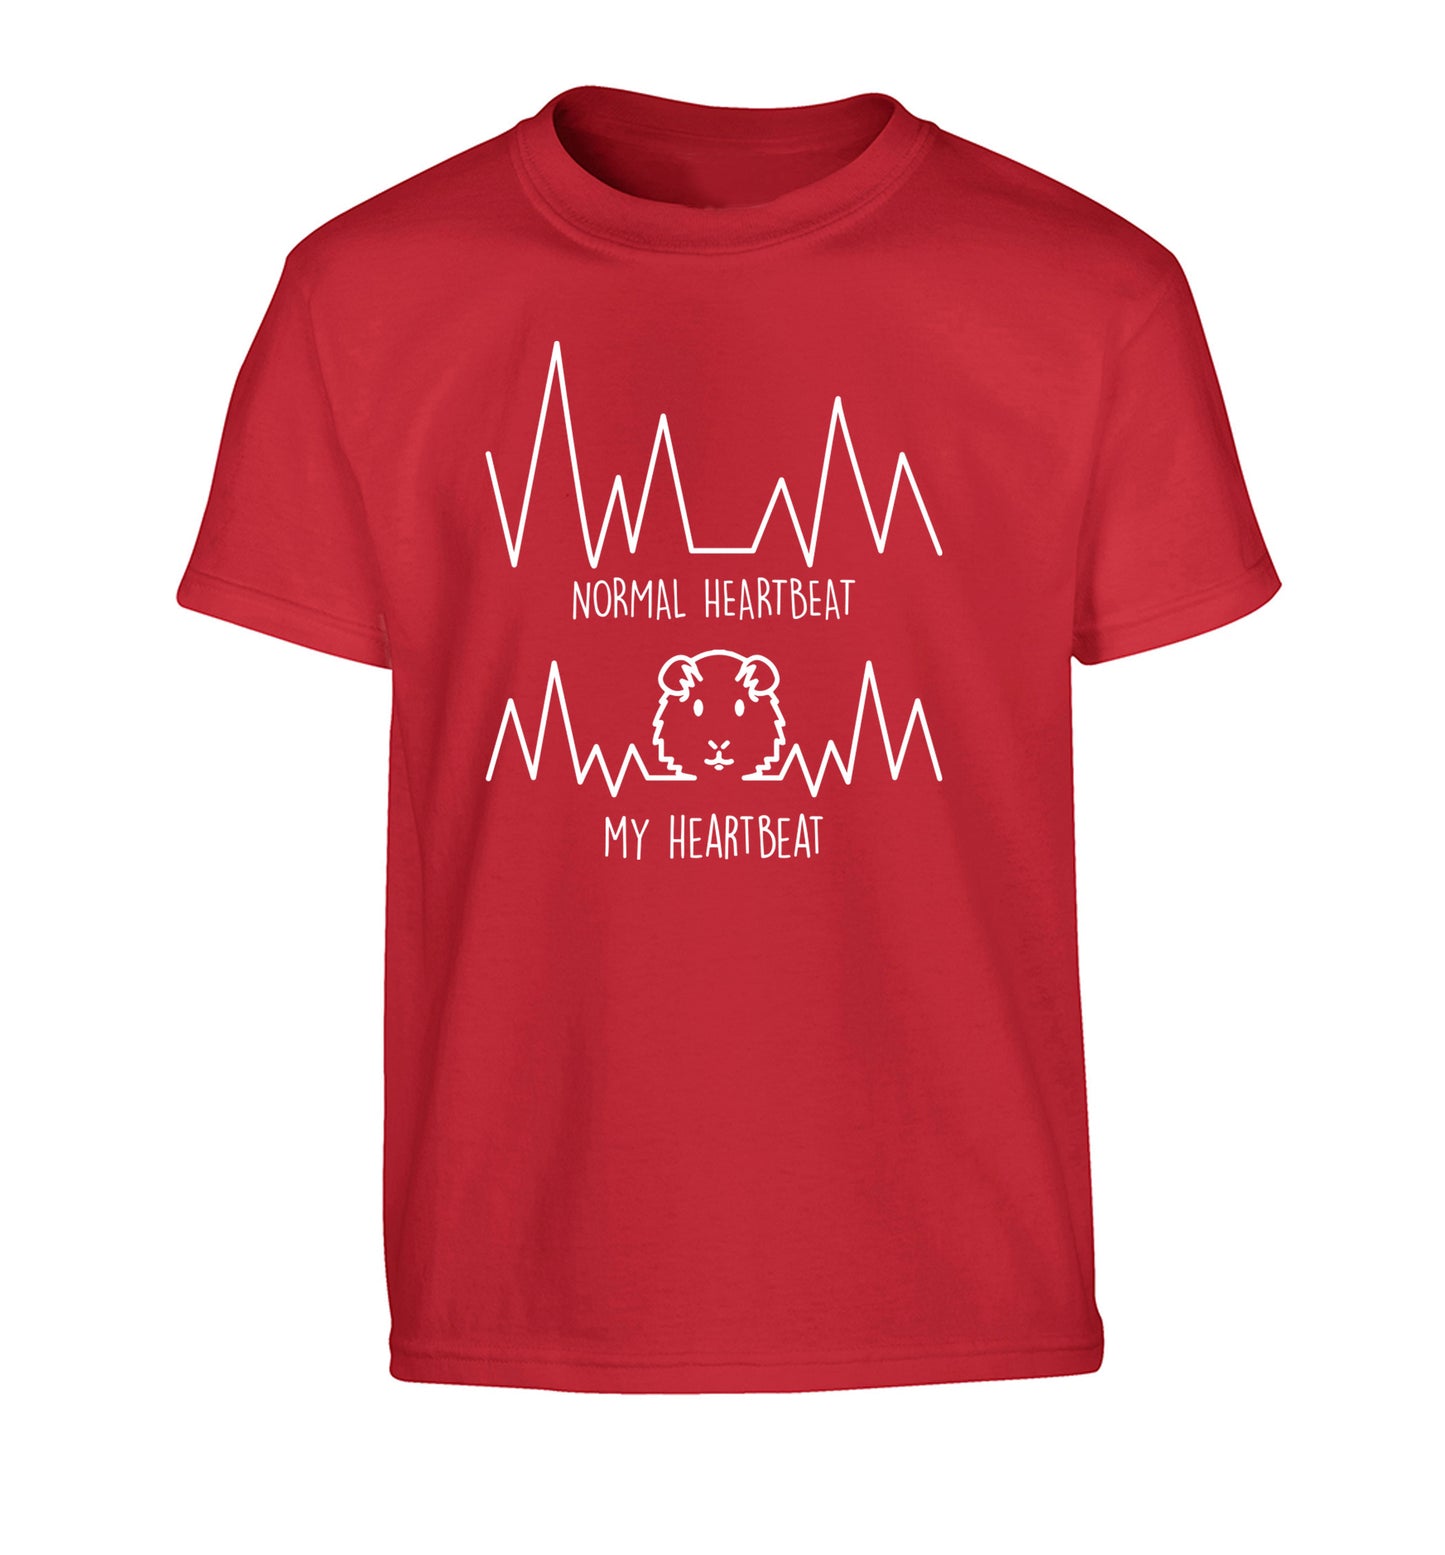 Normal heartbeat vs my heartbeat guinea pig lover Children's red Tshirt 12-14 Years